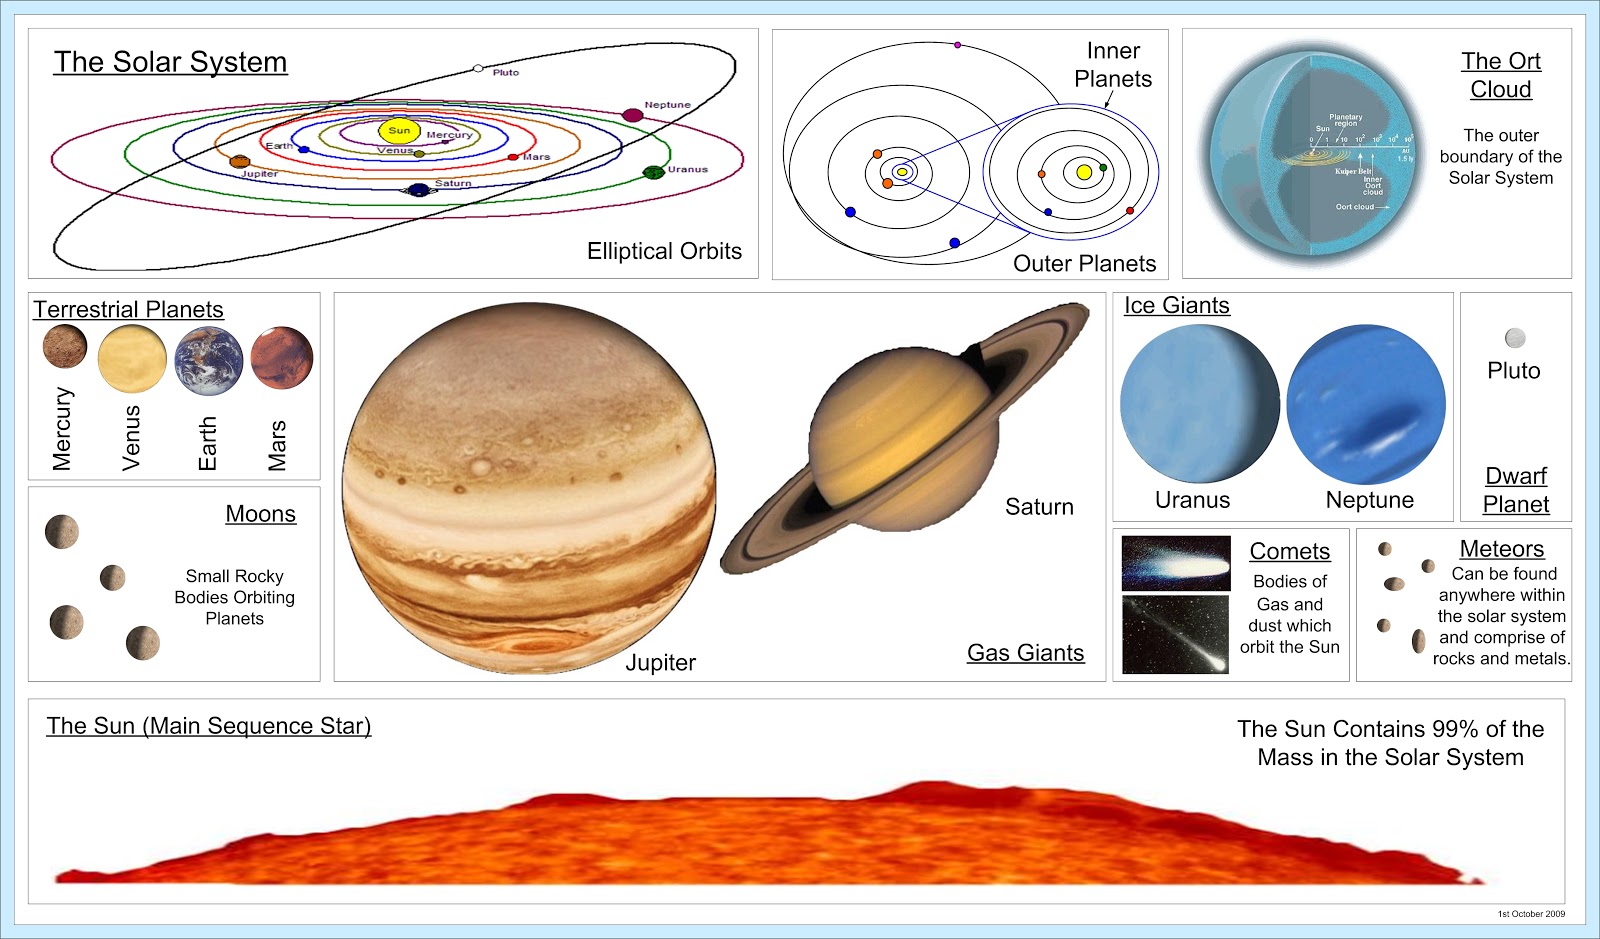 Solar System posters: Free Posters of the planets / solar system1600 x 939